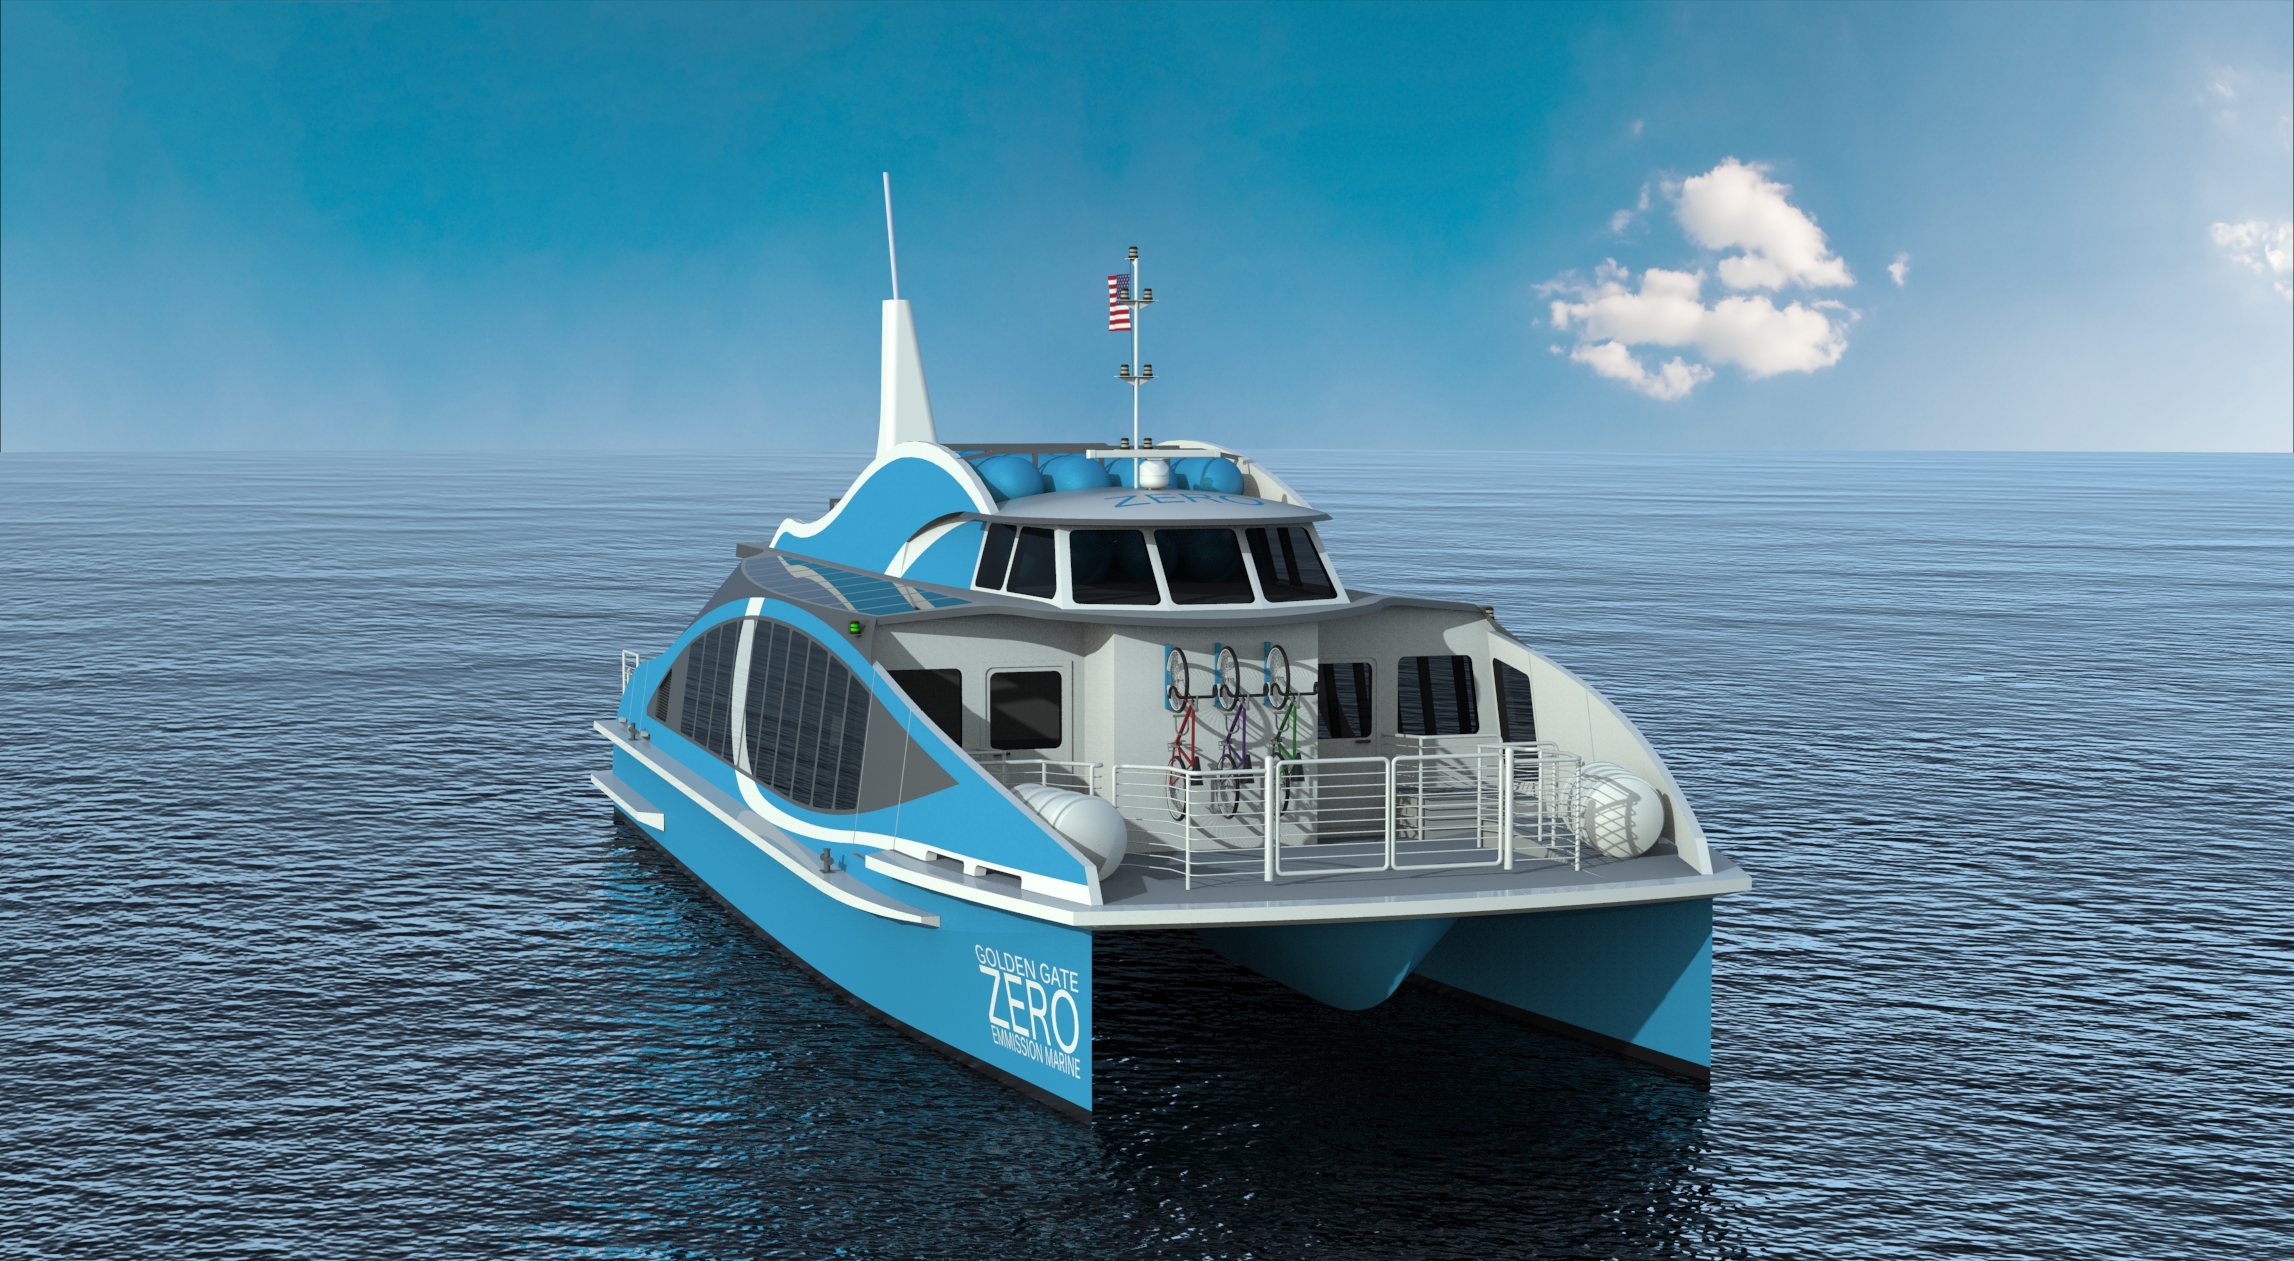 An artist's rendering of the <a href="https://watergoround.com/">Water-Go-Round</a>, a hydrogen-powered passenger ferry due out in 2019. This entrepreneurial project is the result of a study that preceded Sandia's recent hydrogen-powered research vessel study.